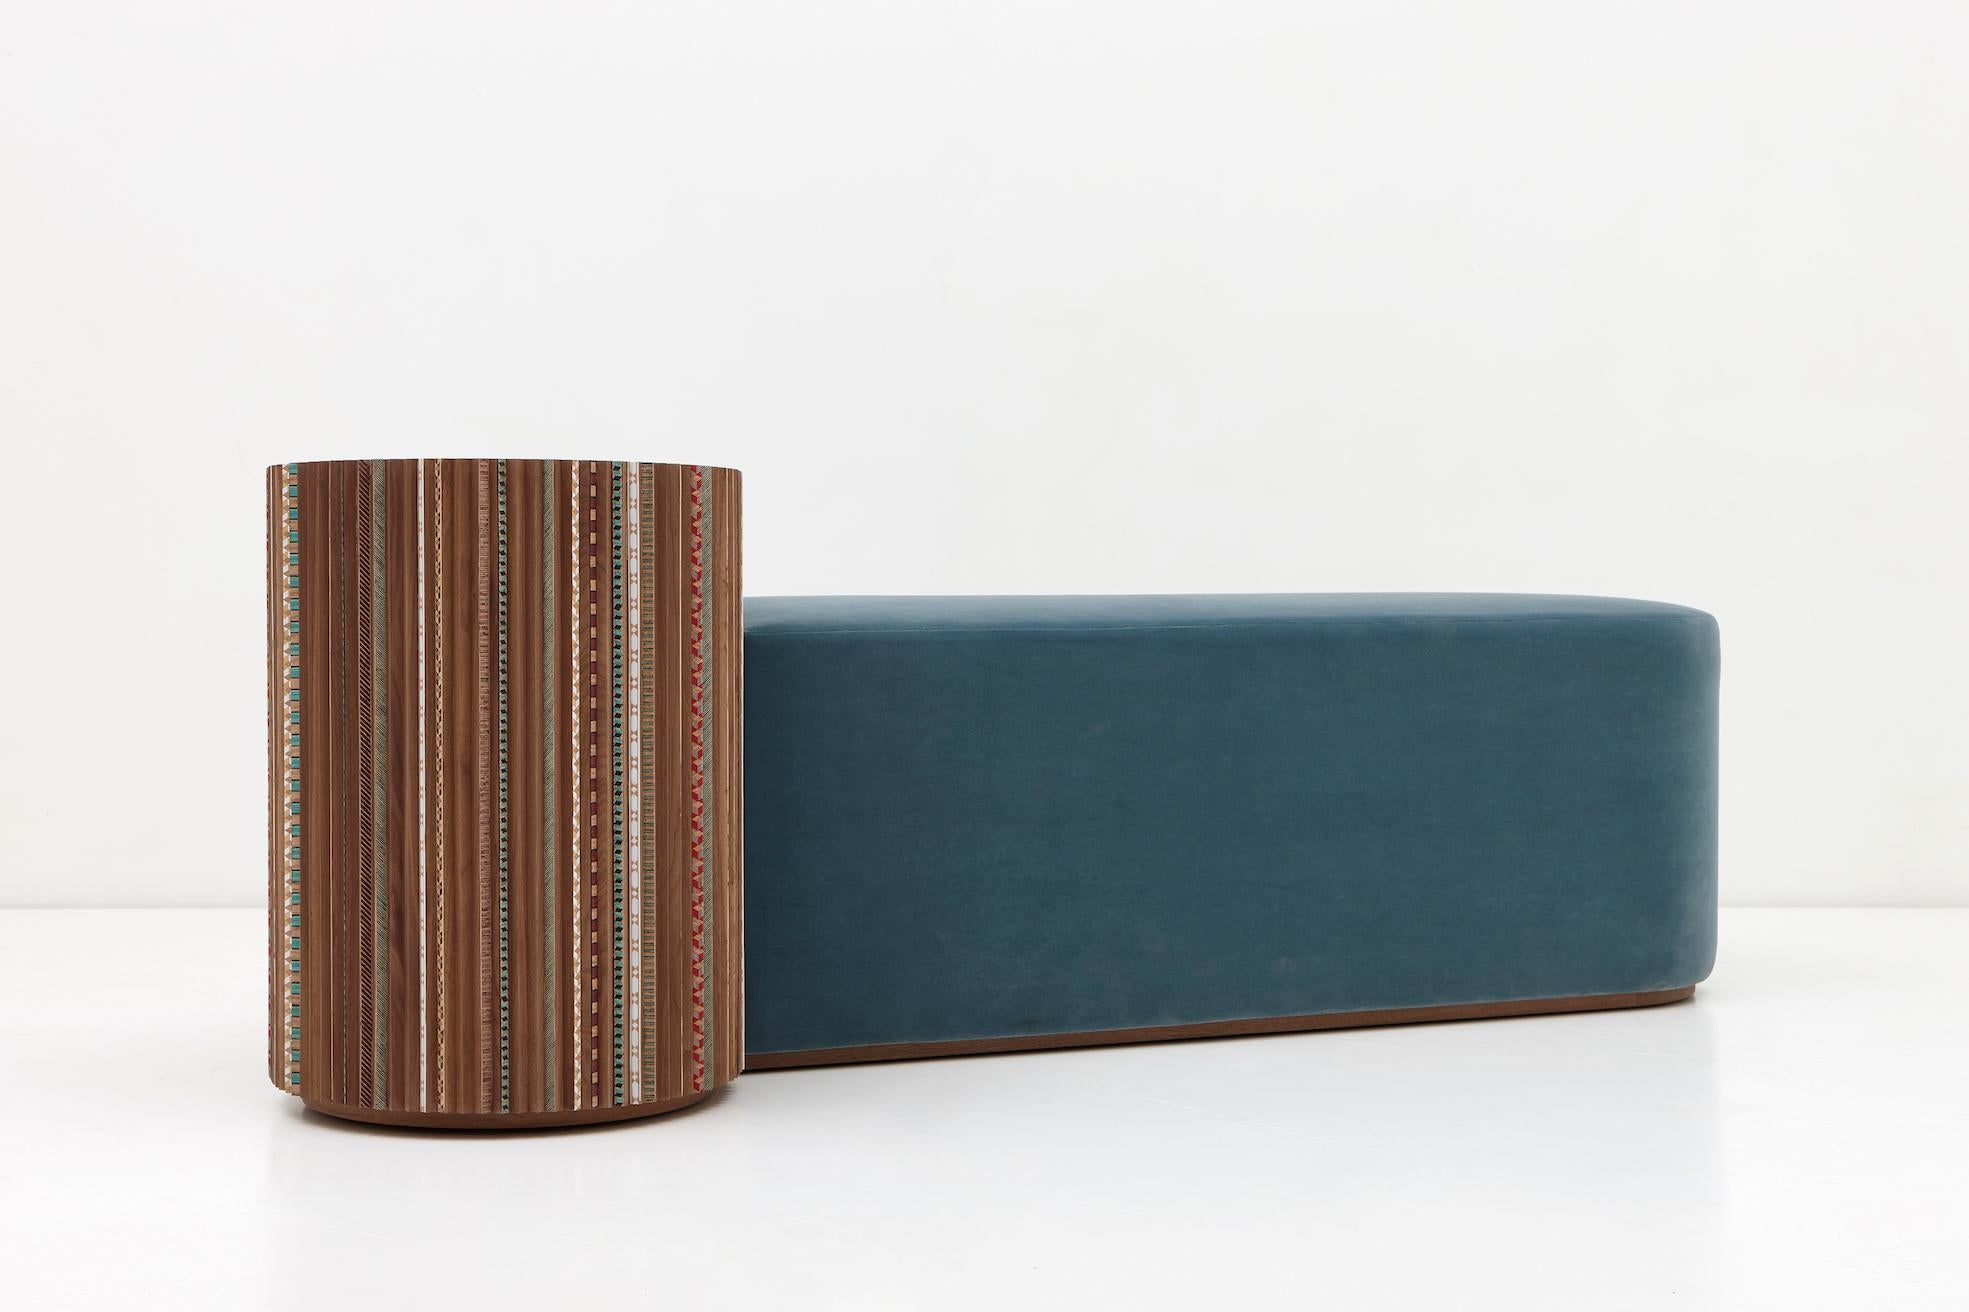 The pleated bench - part of the Funquetry collection which takes a traditional craft to create new patterns with a ‘fun’ edge - is a dialogue between a circular pleated tabletop and a soft velvet seating element. Available for customization.